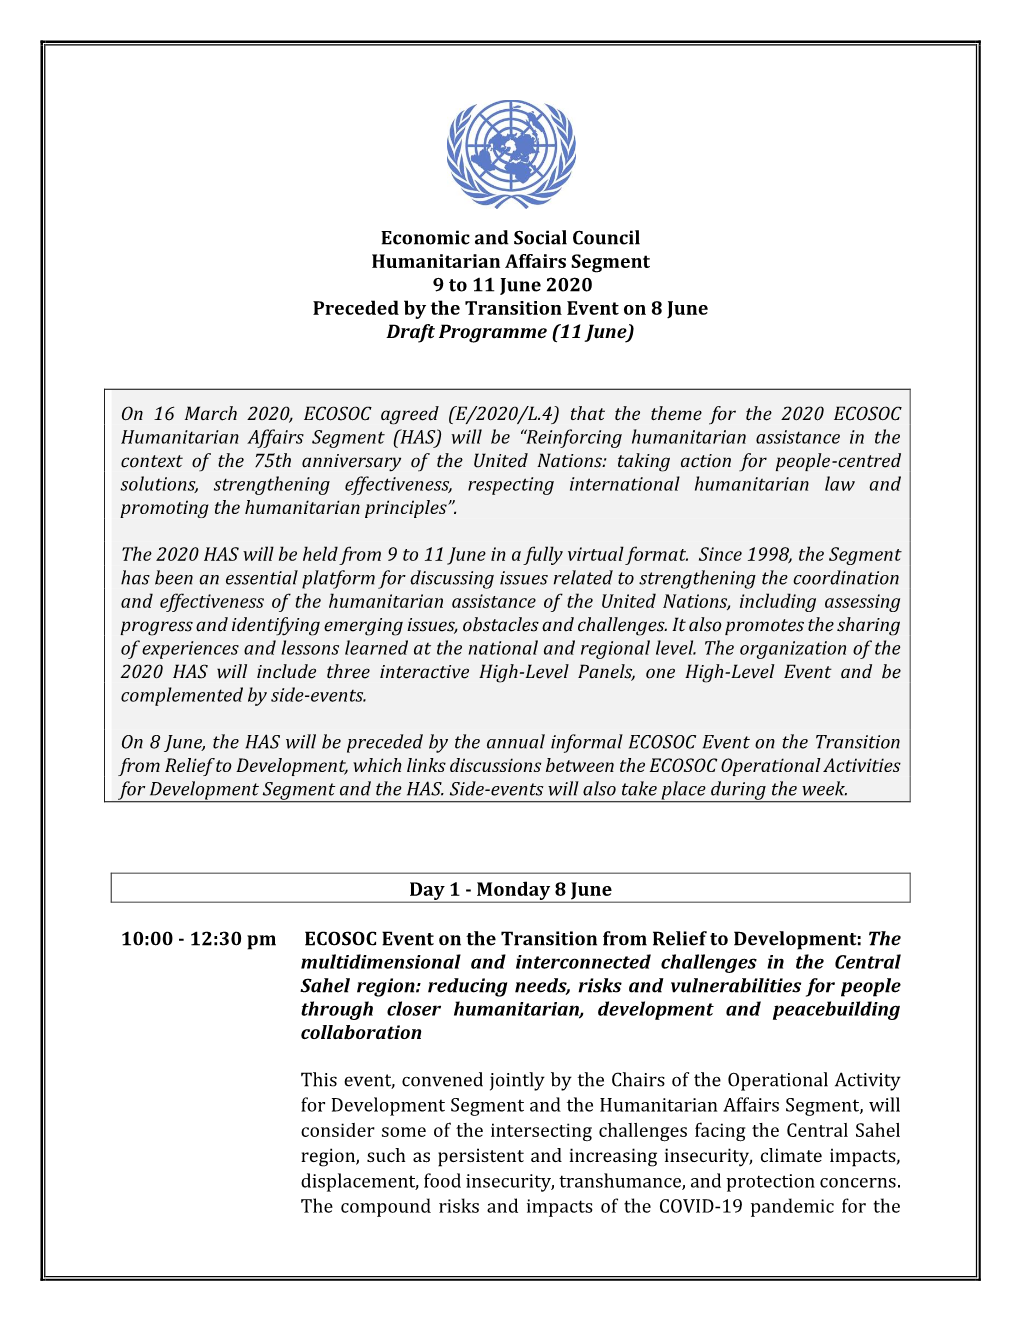 Economic and Social Council Humanitarian Affairs Segment 9 to 11 June 2020 Preceded by the Transition Event on 8 June Draft Programme (11 June)